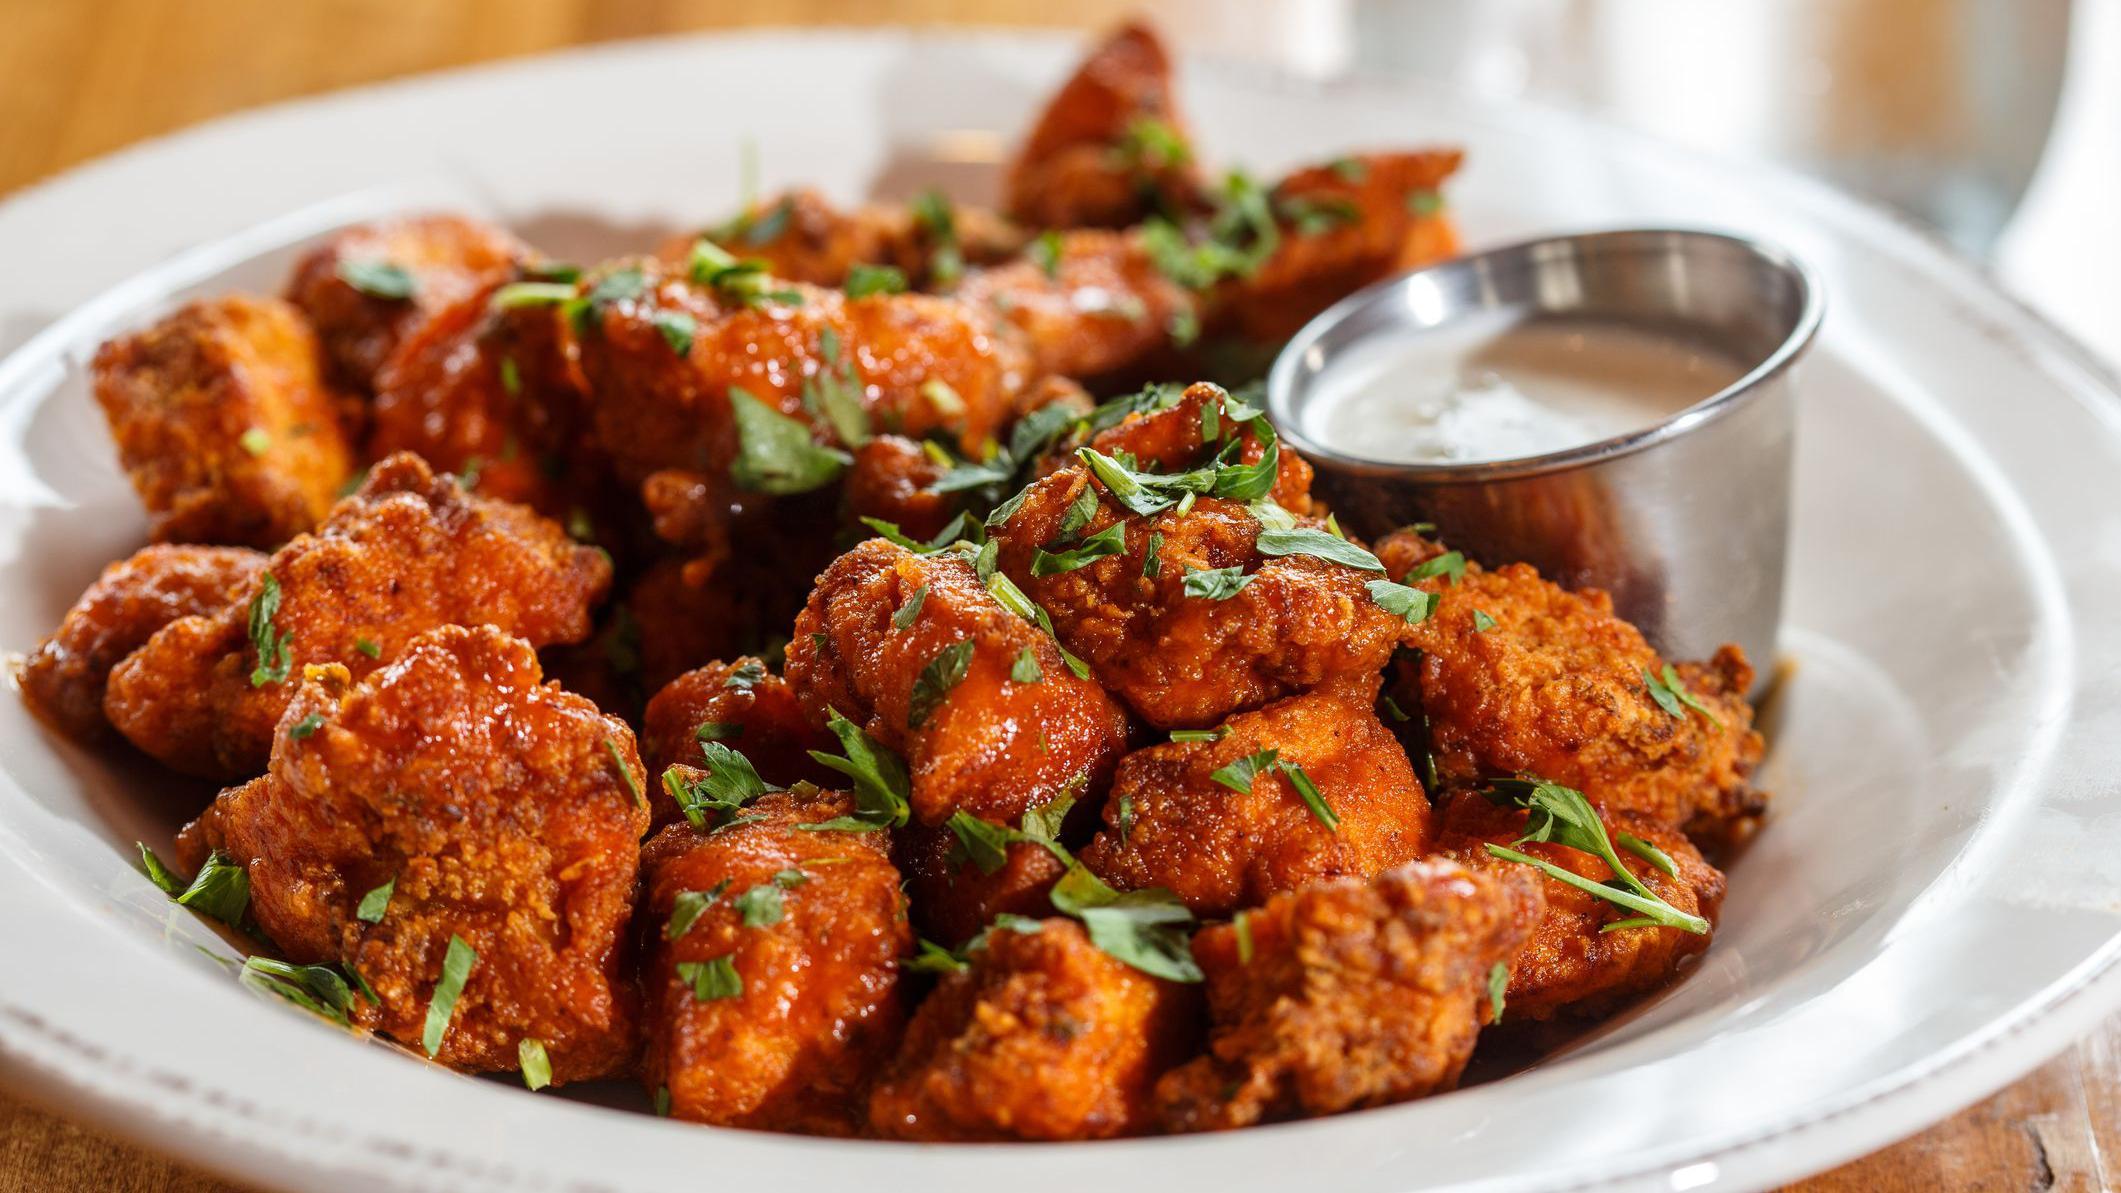 Boneless chicken wings can have bones, US court rules